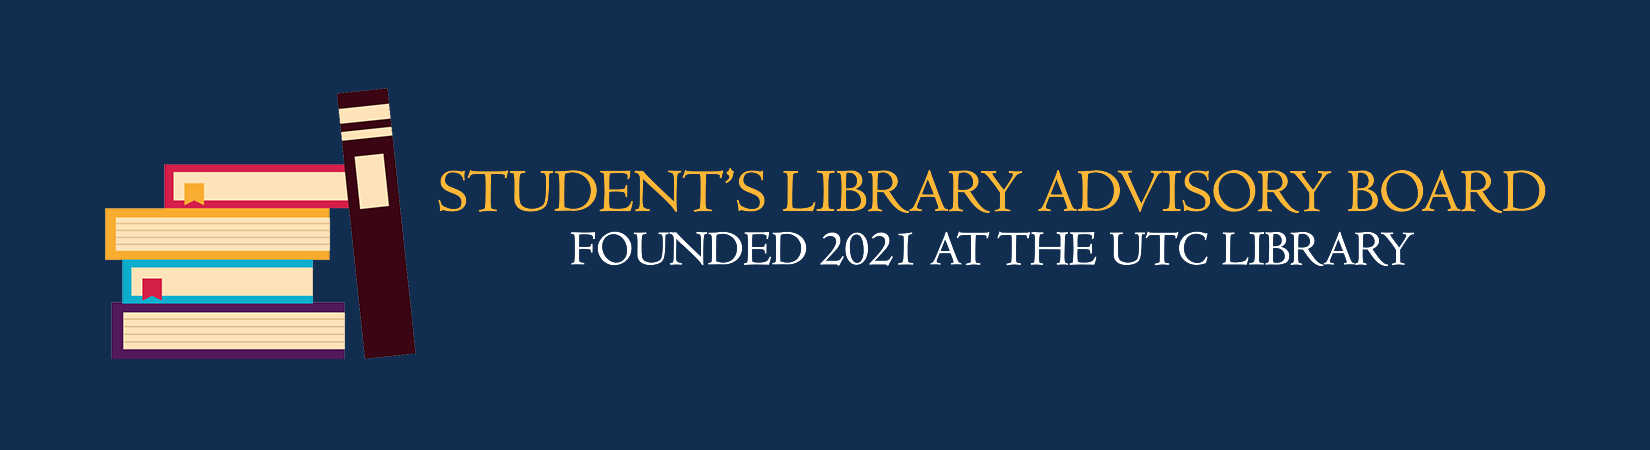 Student's Library Advisory Board Founded 2021 at the UTC Library